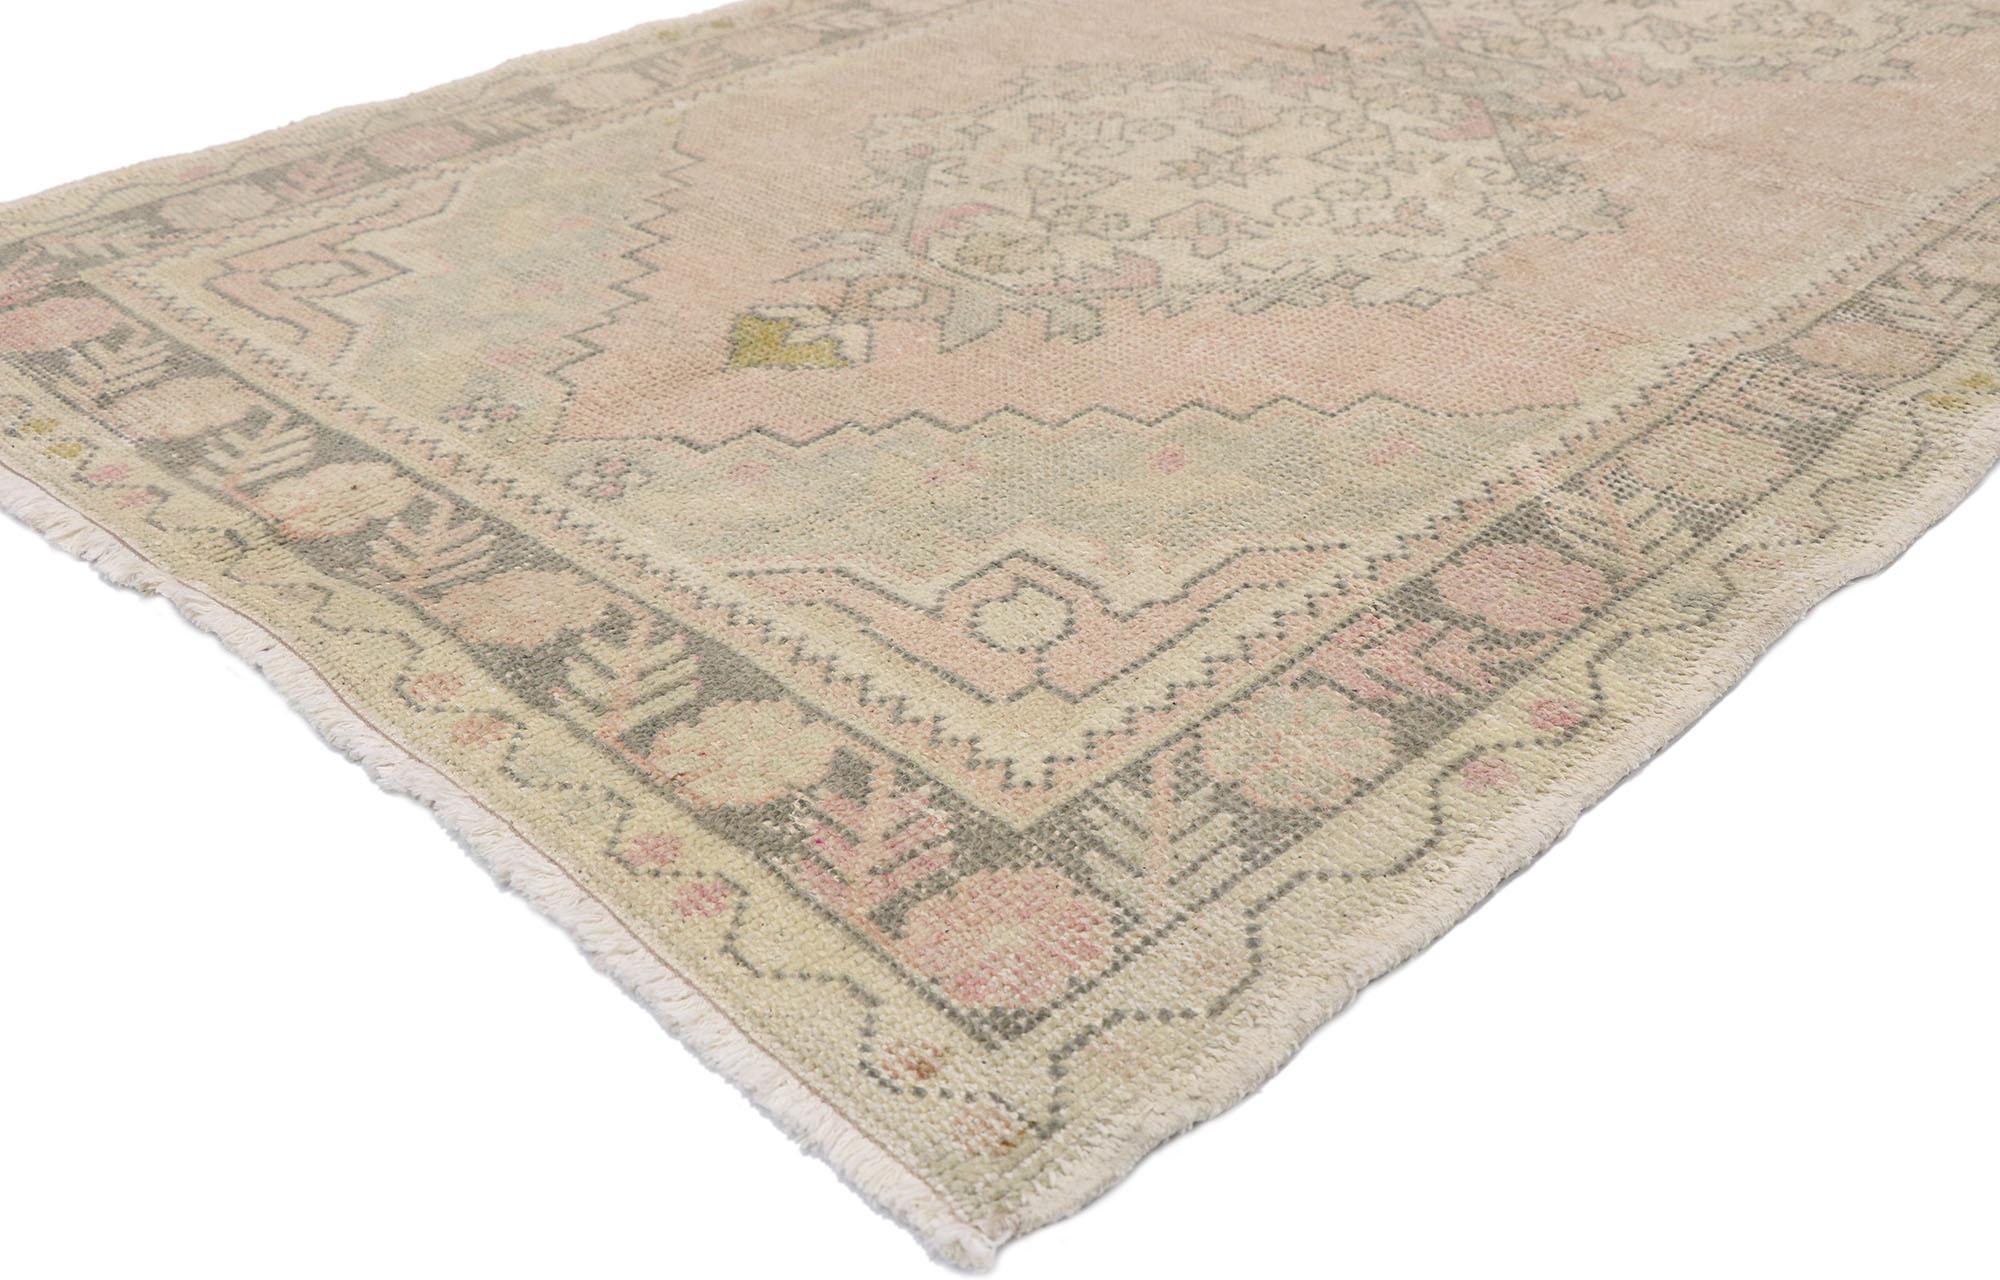 52720 Distressed Vintage Turkish Oushak Runner with Romantic Georgian Style 03'05 x 08'11. Romance and rusticity collide in this hand knotted wool distressed vintage Turkish Oushak runner. It features four stacked medallions patterned with stylized